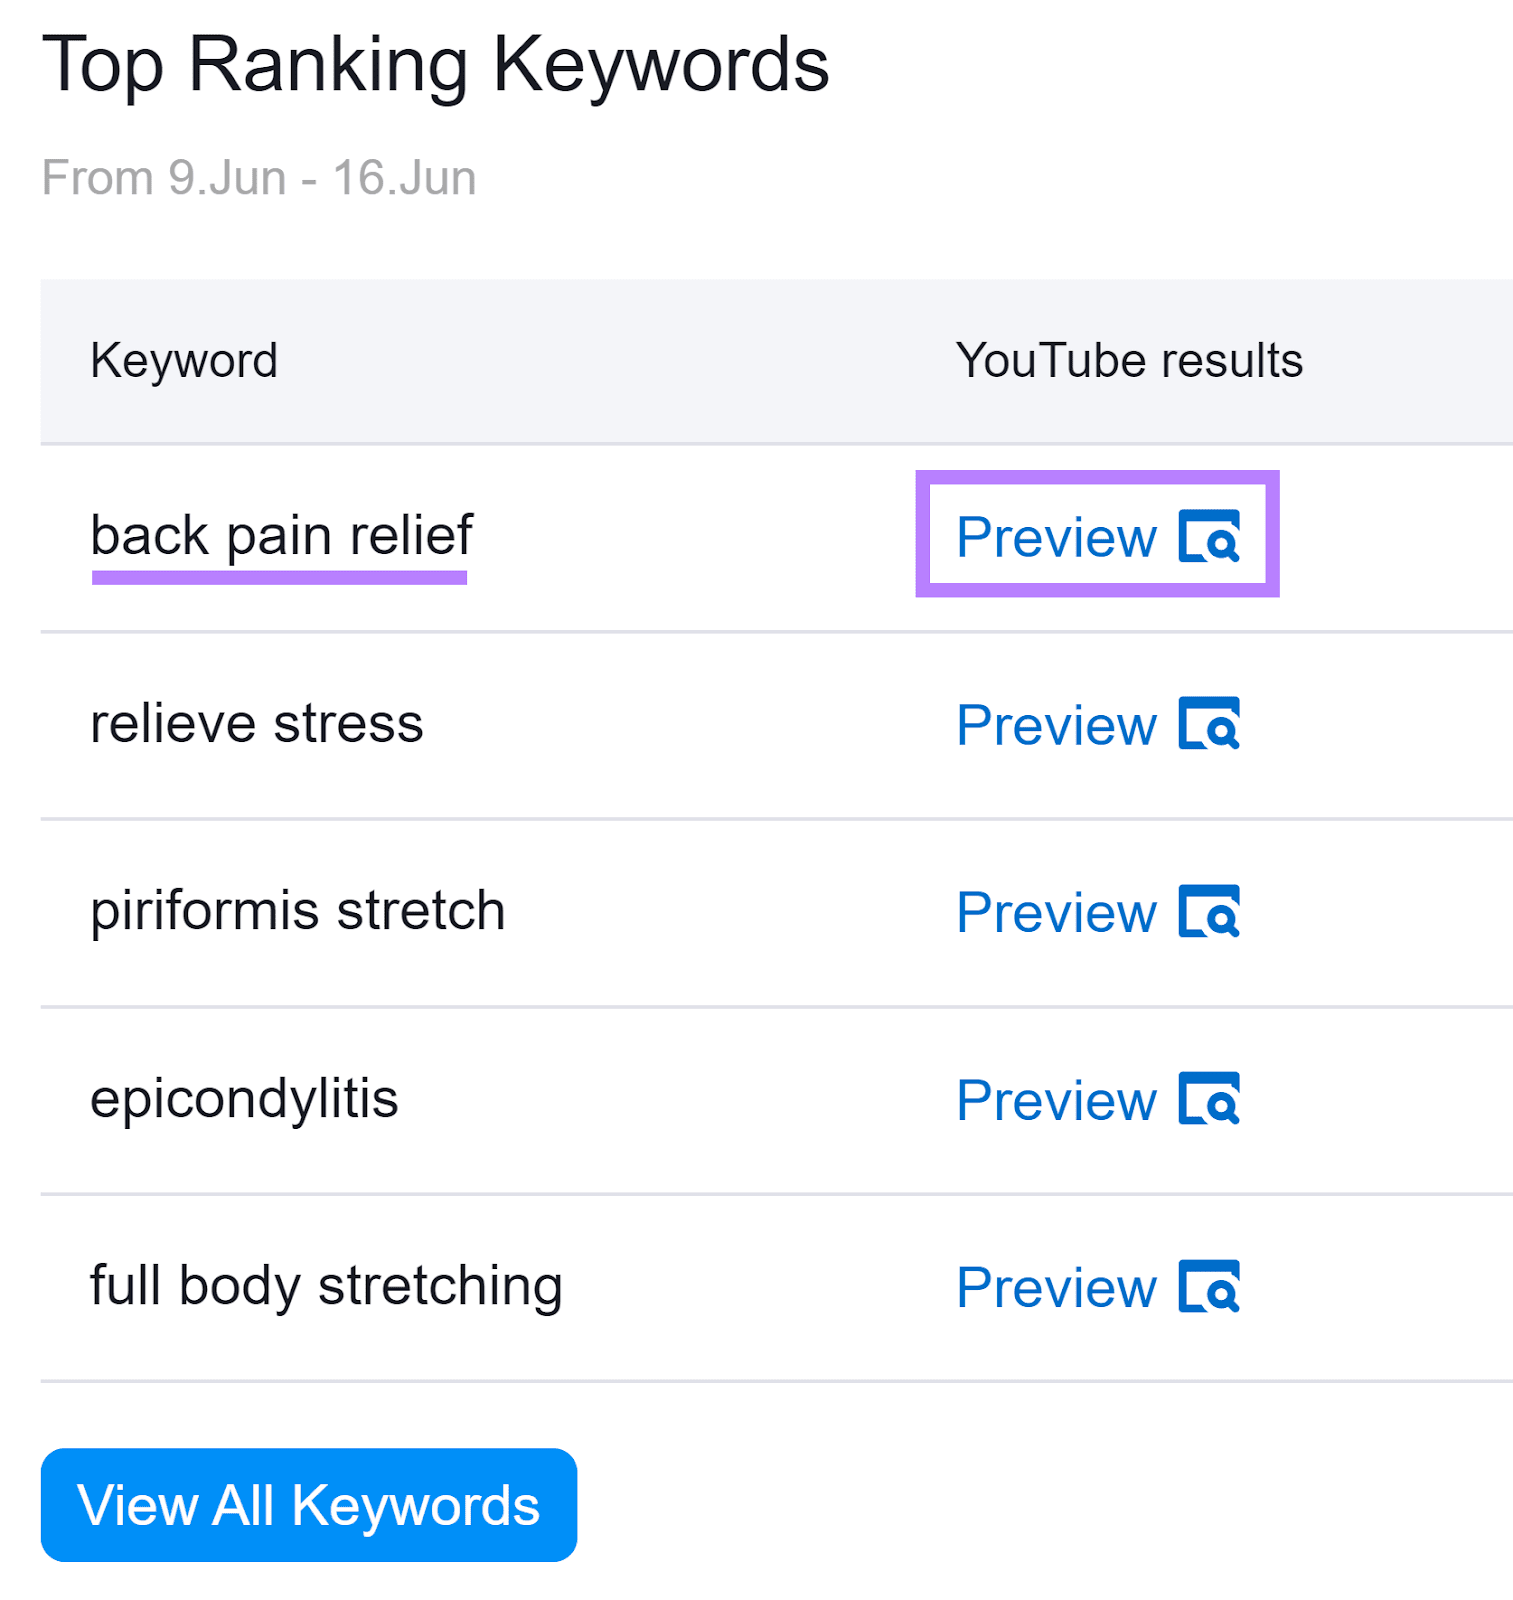 Top Ranking Keywords section with 'back pain relief' keyword and corresponding 'Preview' button highlighted.